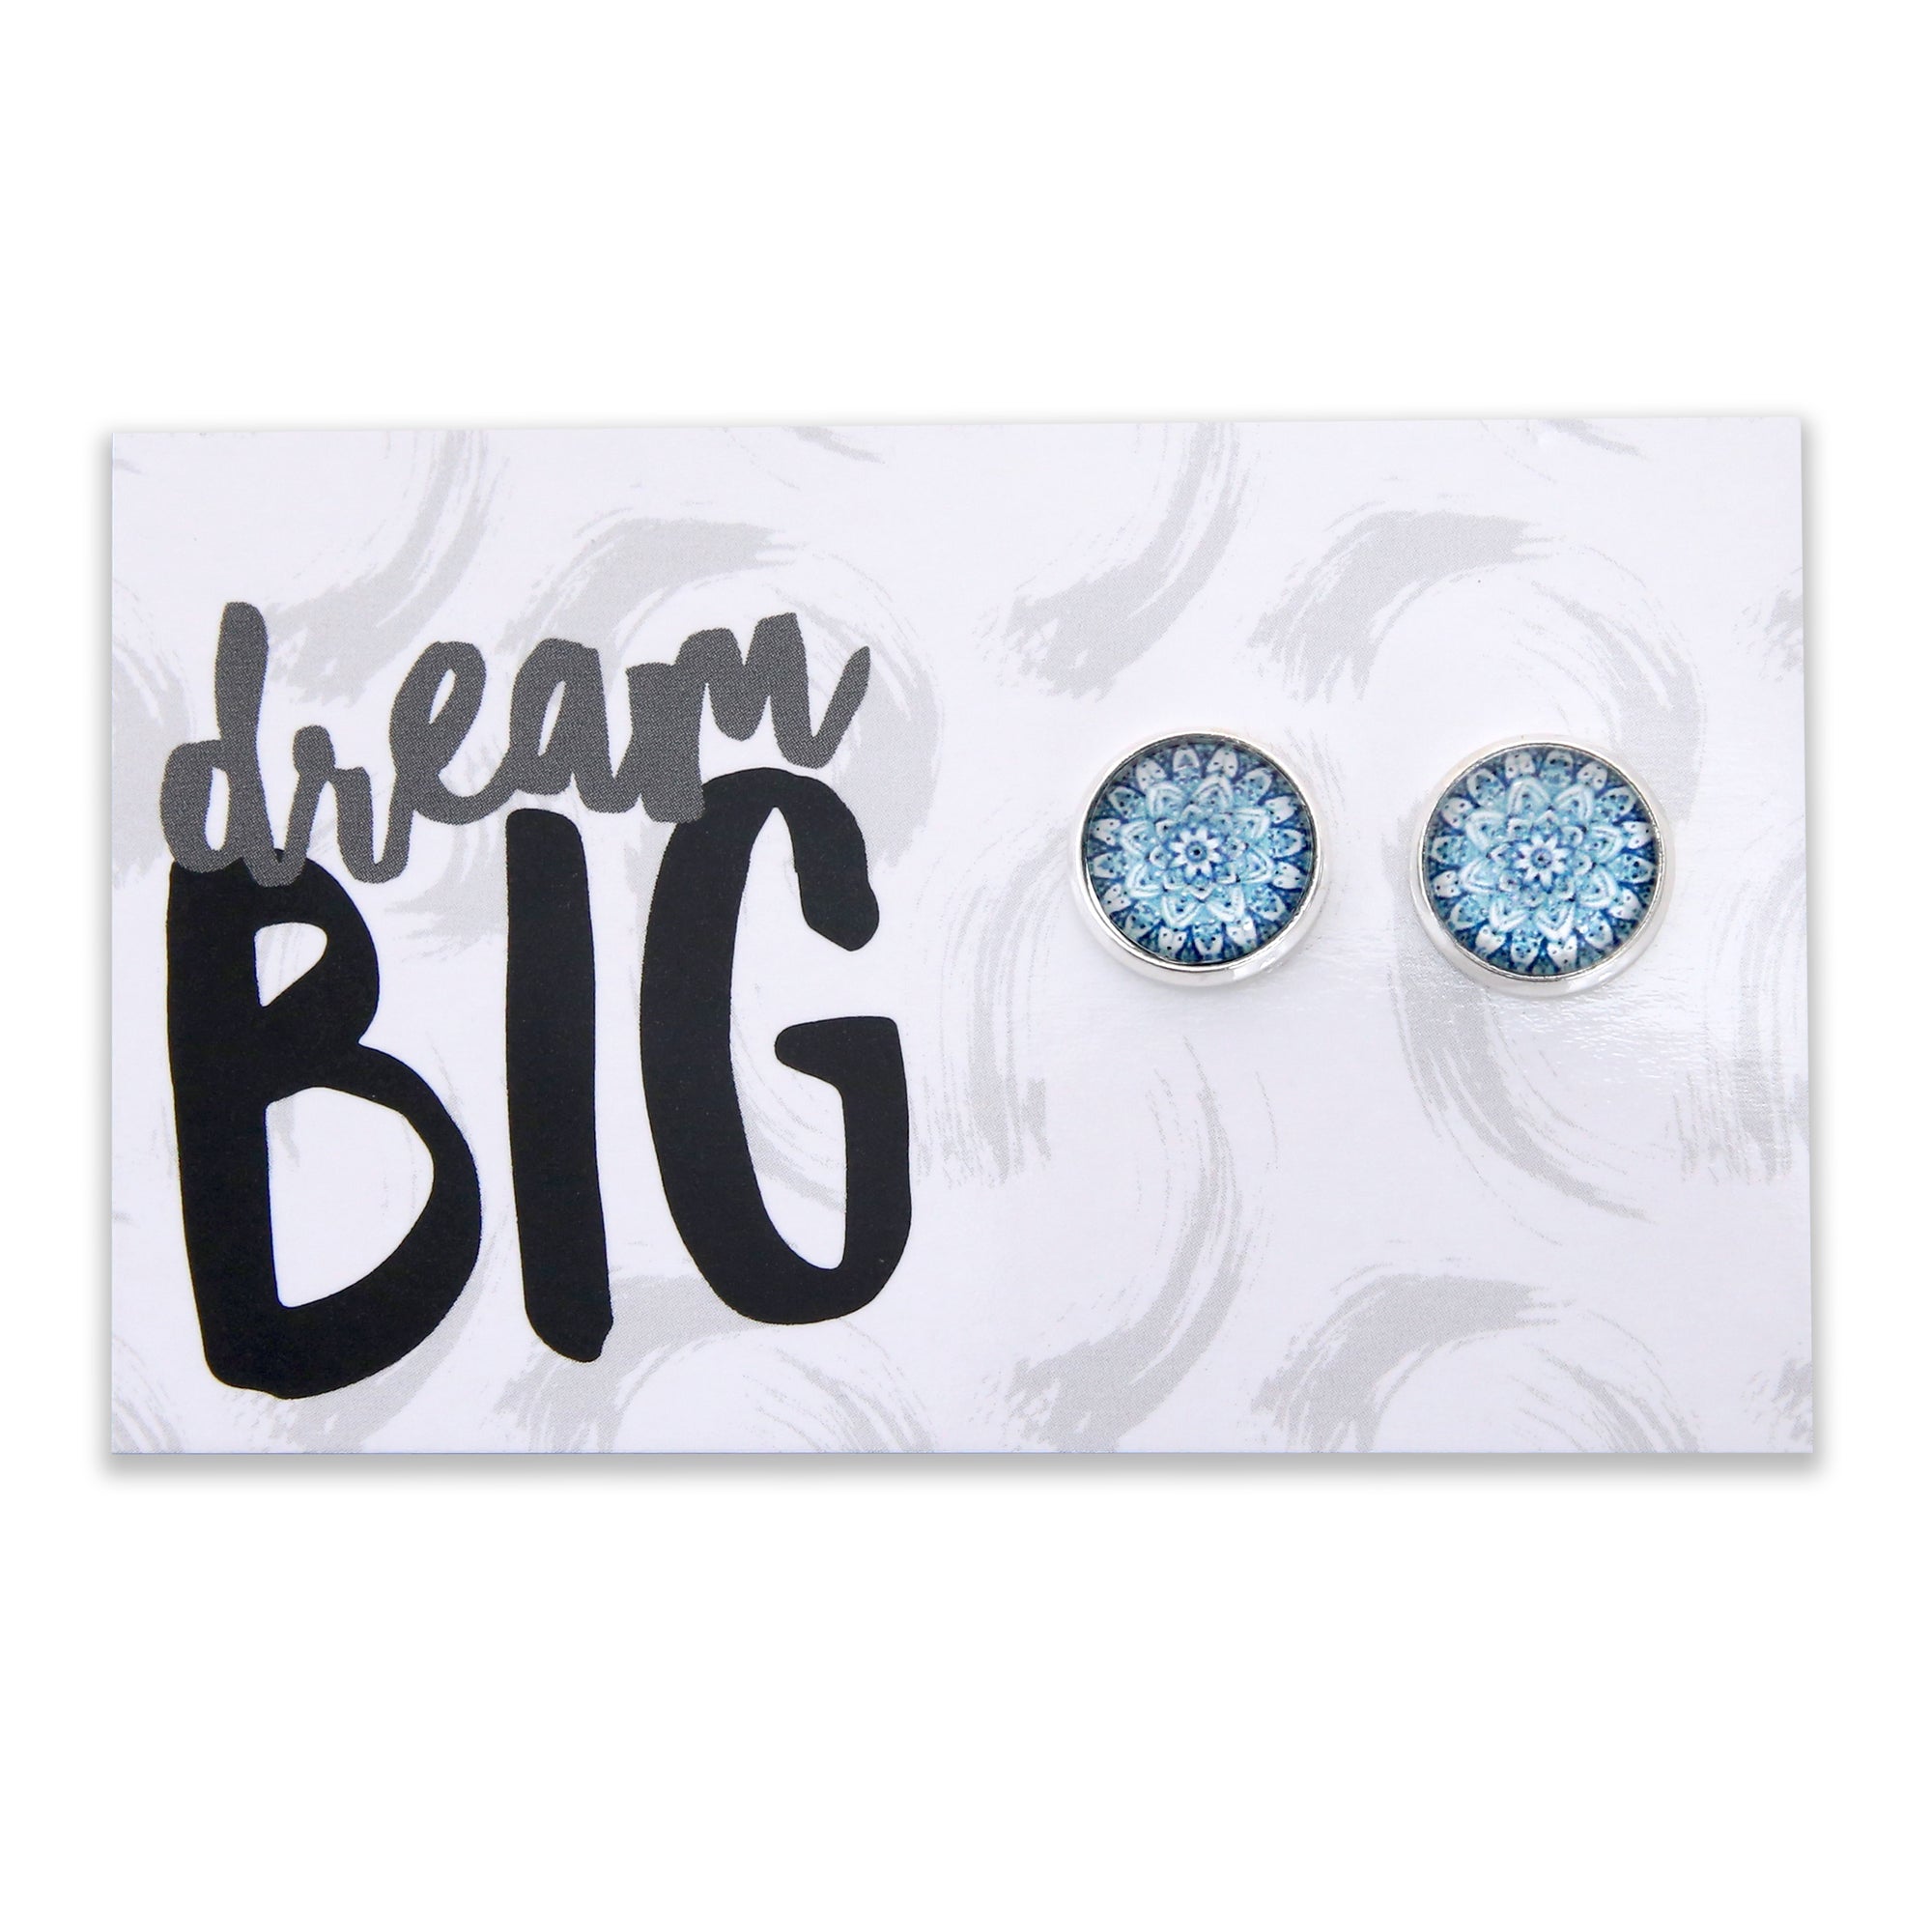 Dream Big - Bright Silver 12mm Circle Studs - Floral Ice (8601)